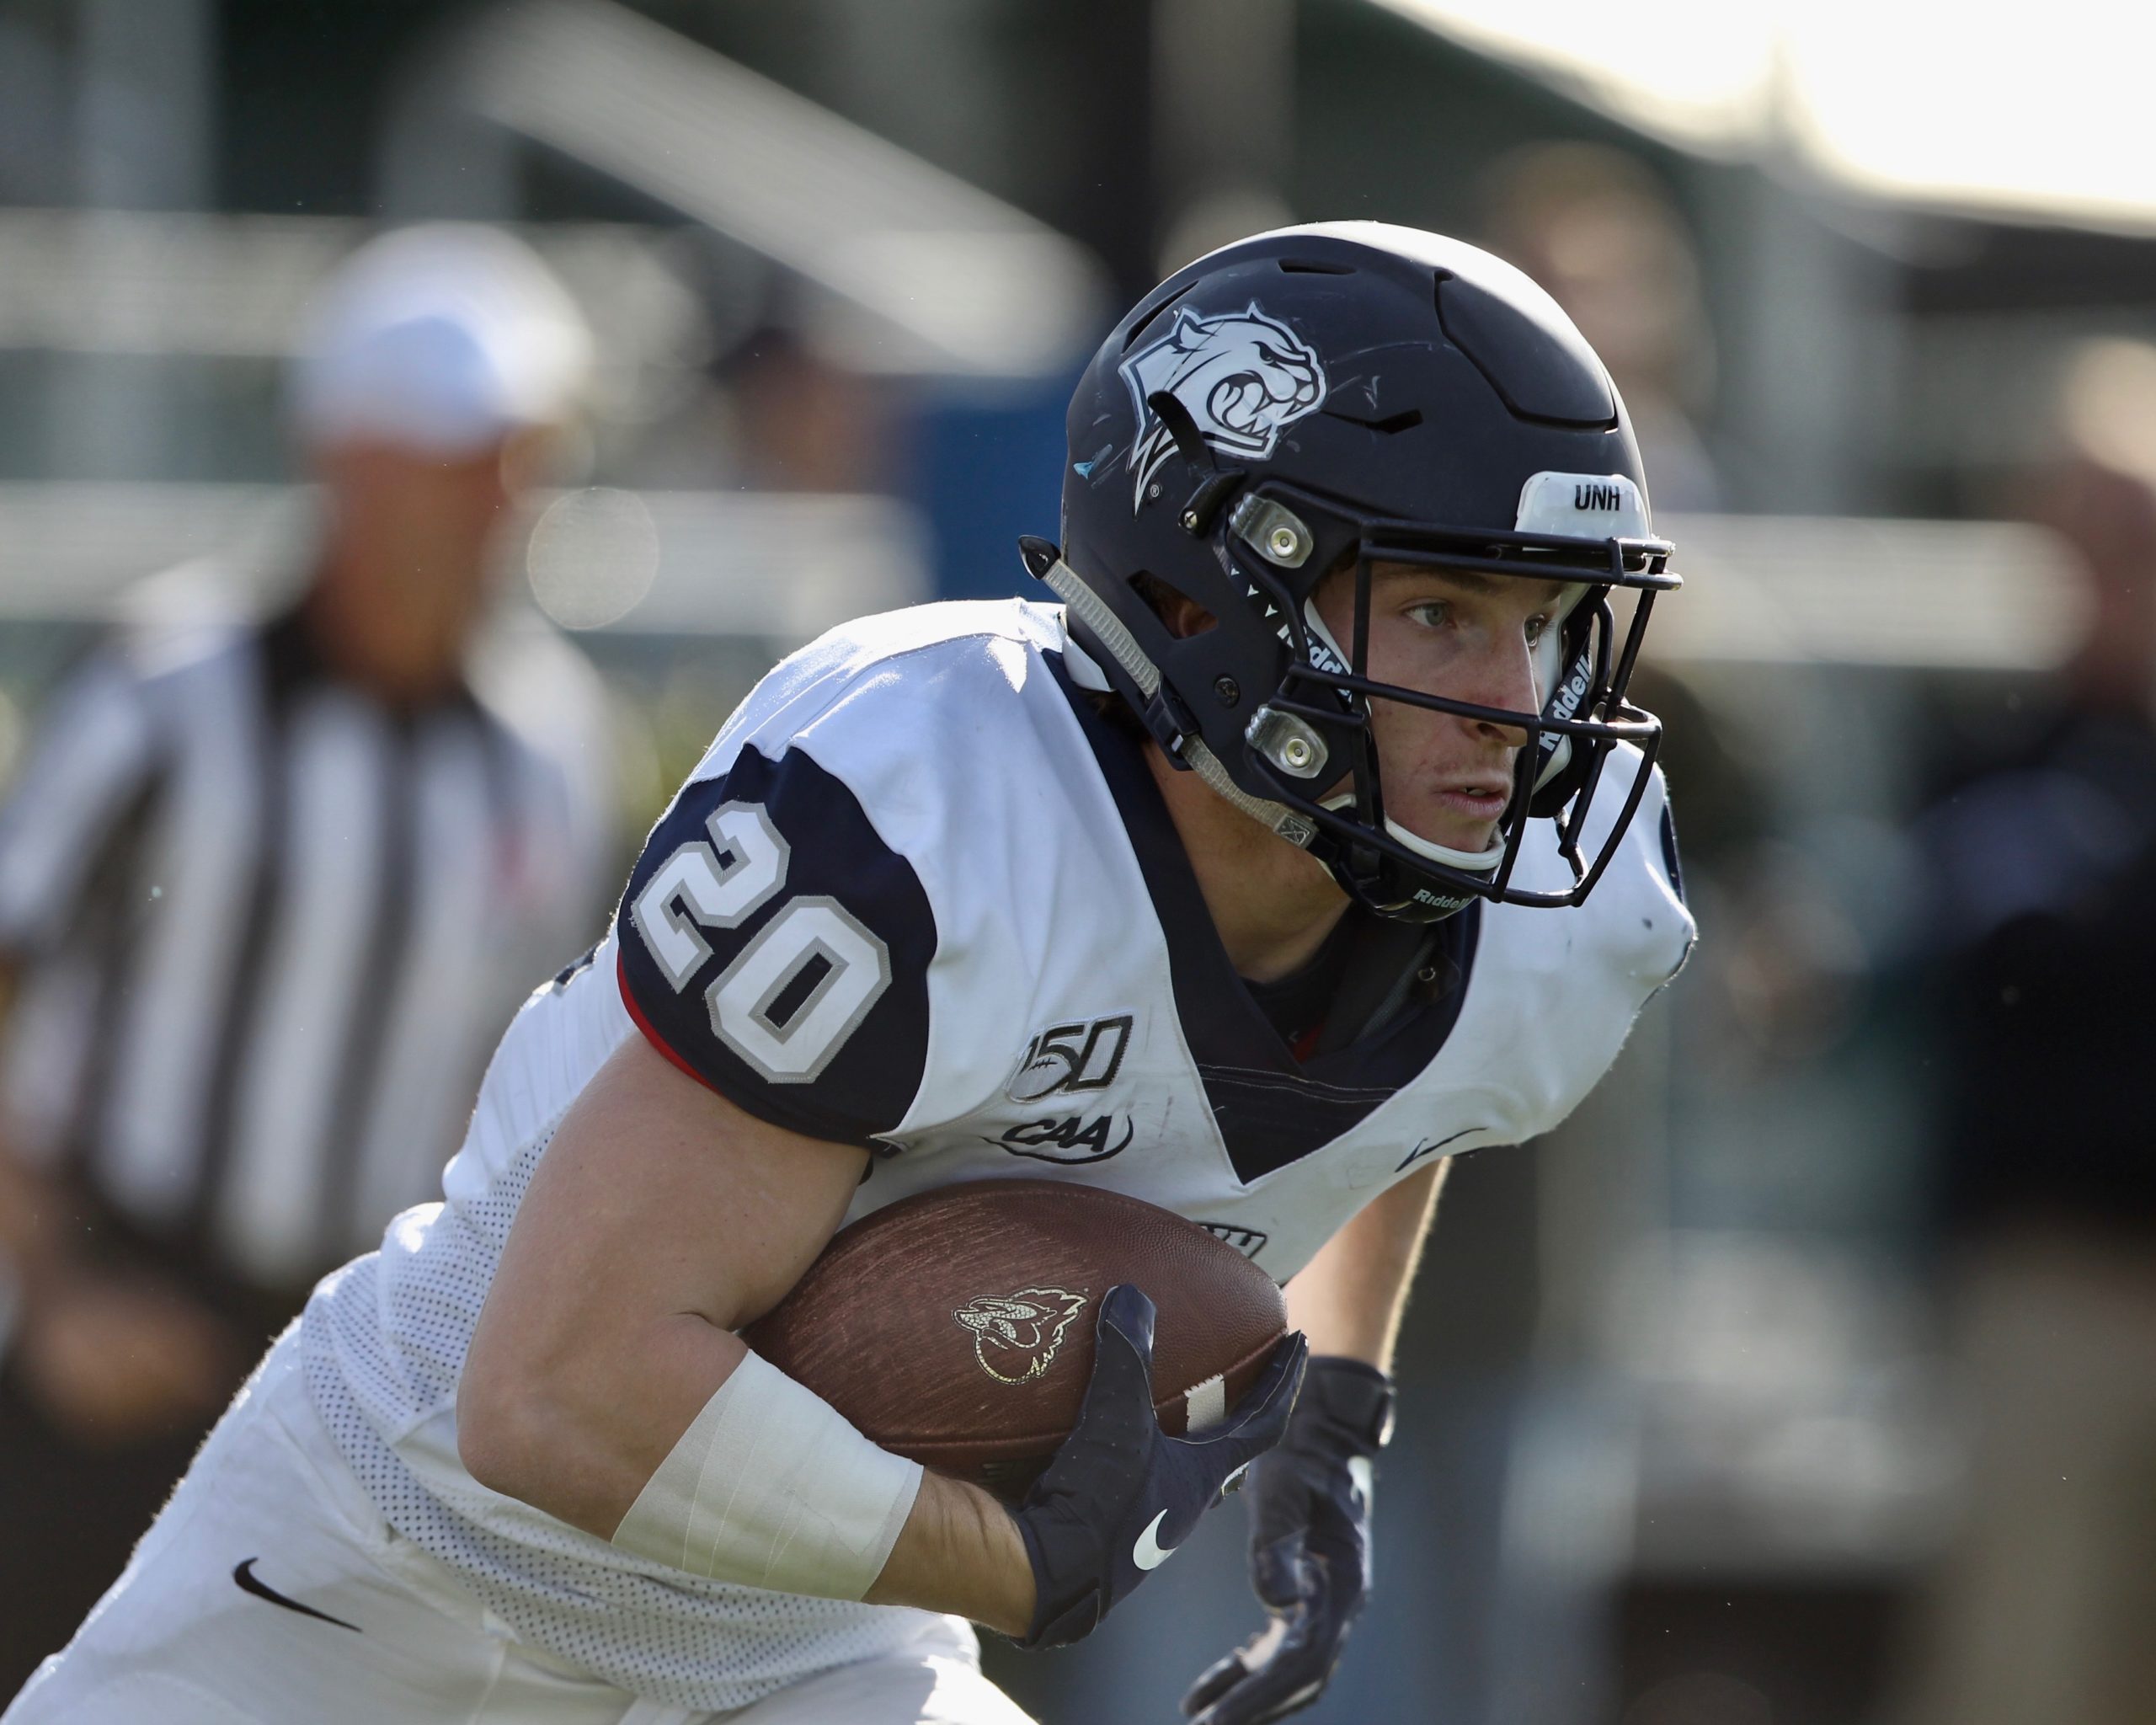 Westhampton Beach graduate Dylan Laube and the University of New Hampshire football team open their season at Stony Brook University on September 2.